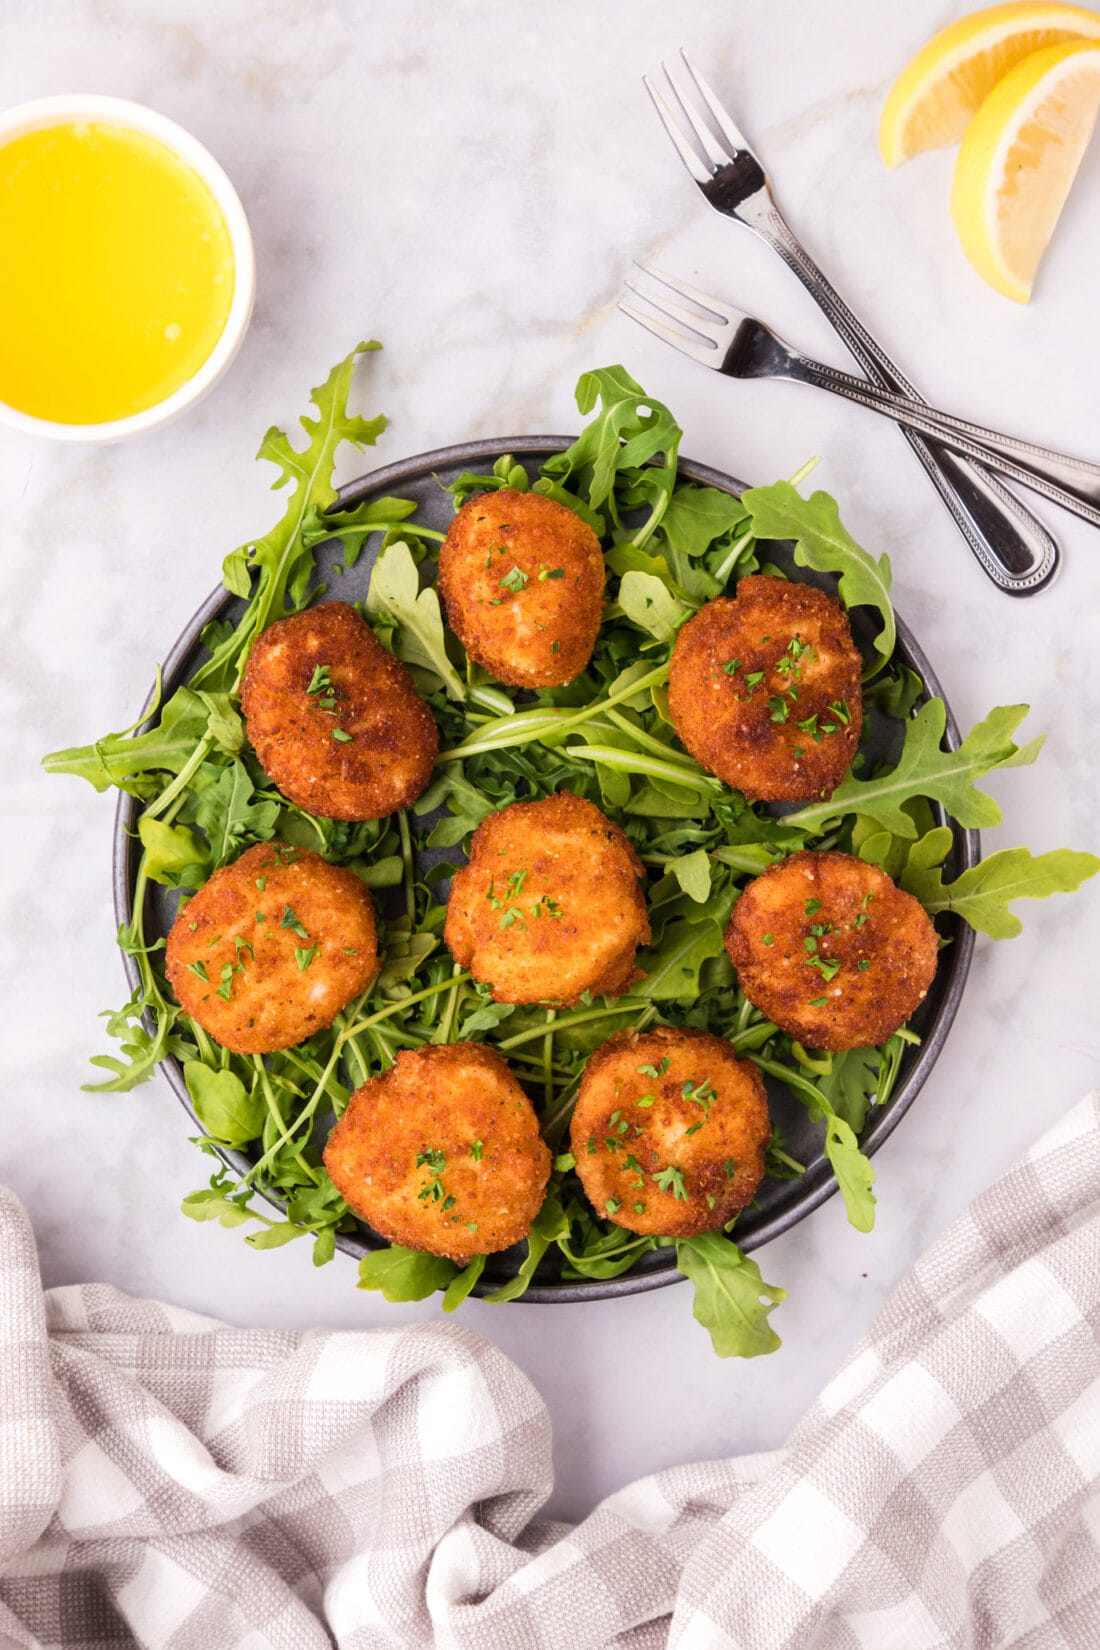 Fried Scallops on a bed of greens